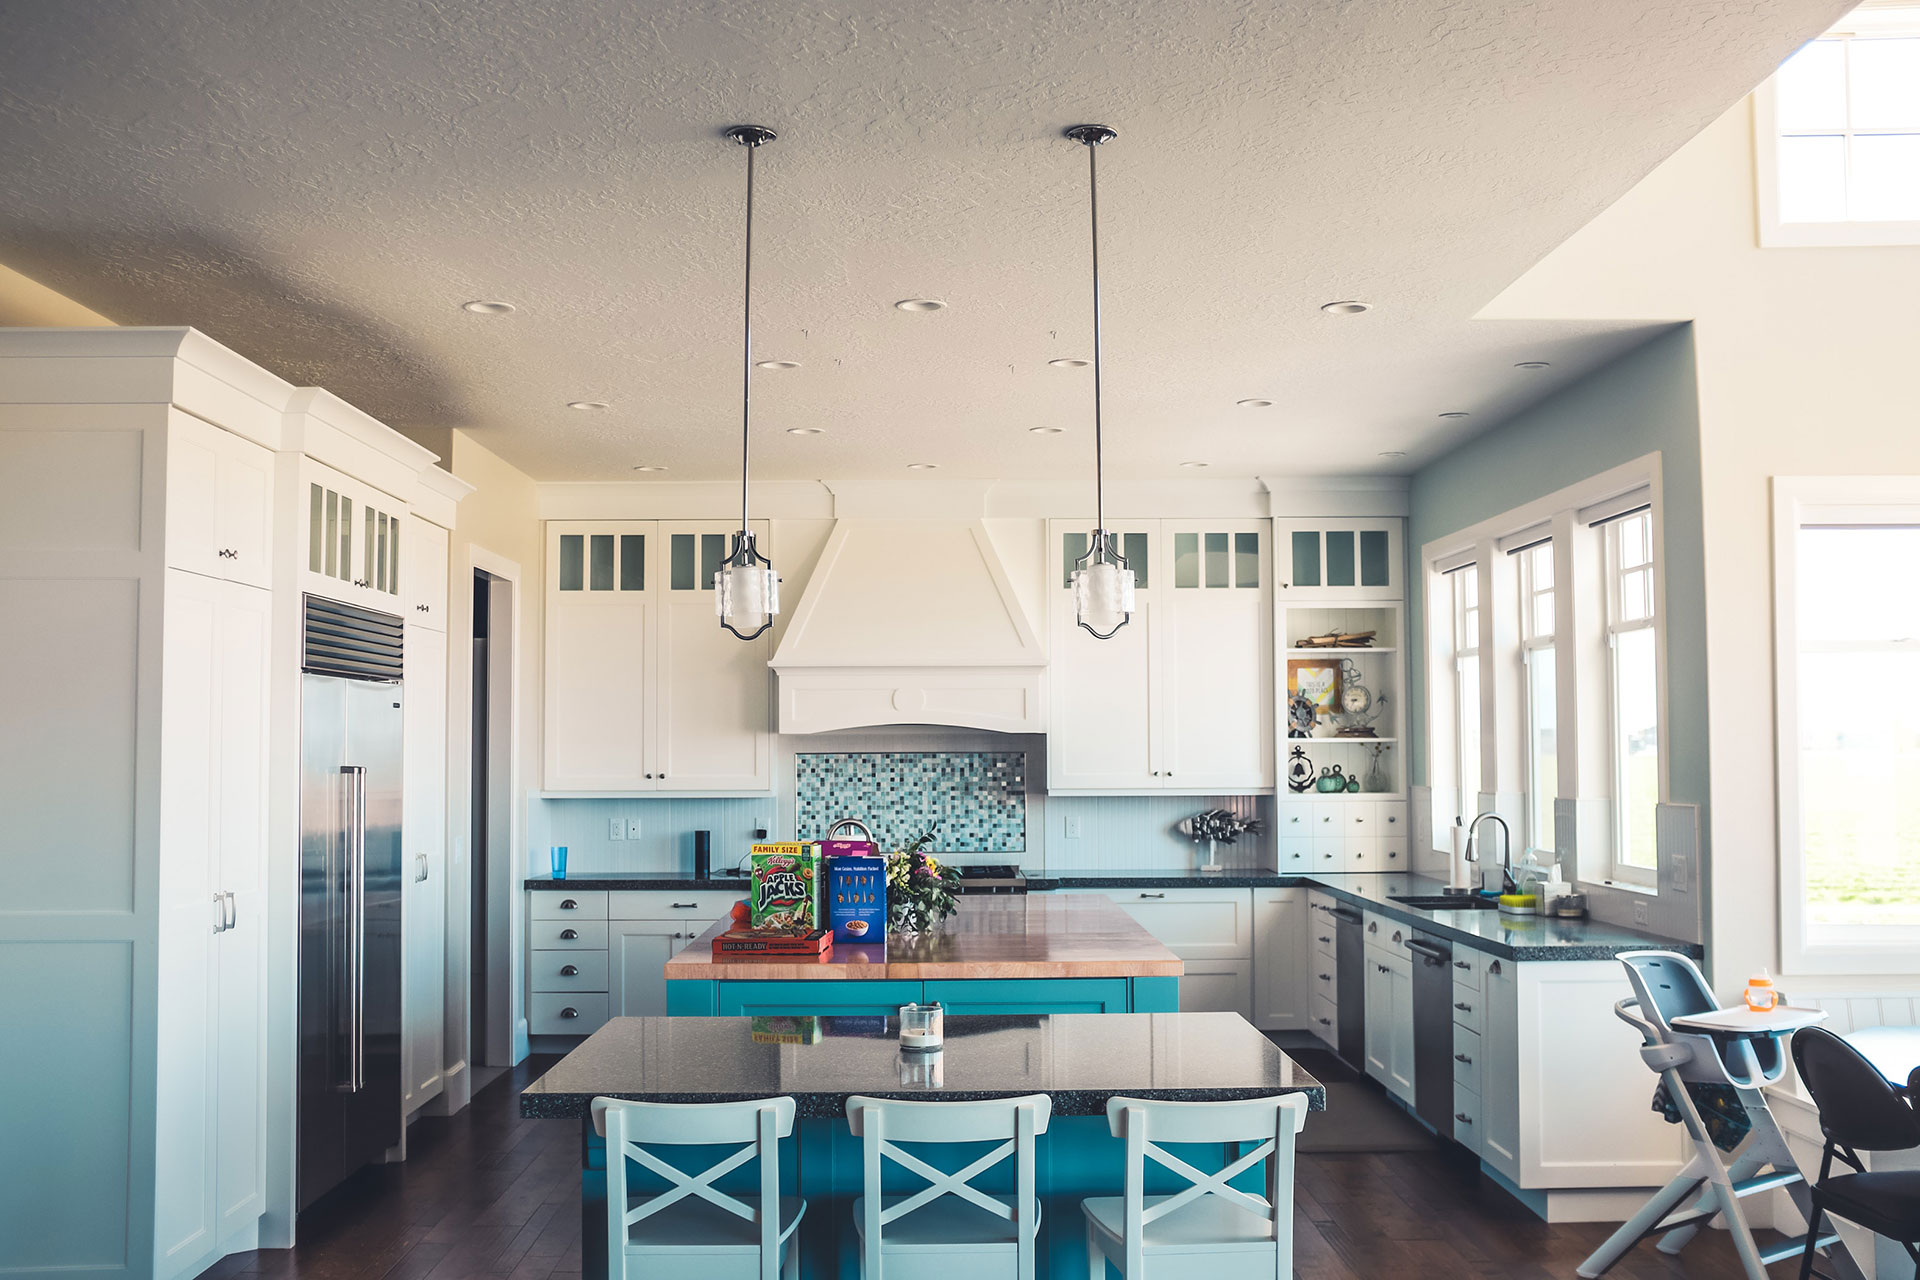 A kitchen with budget-friendly white cabinets and blue counter tops.